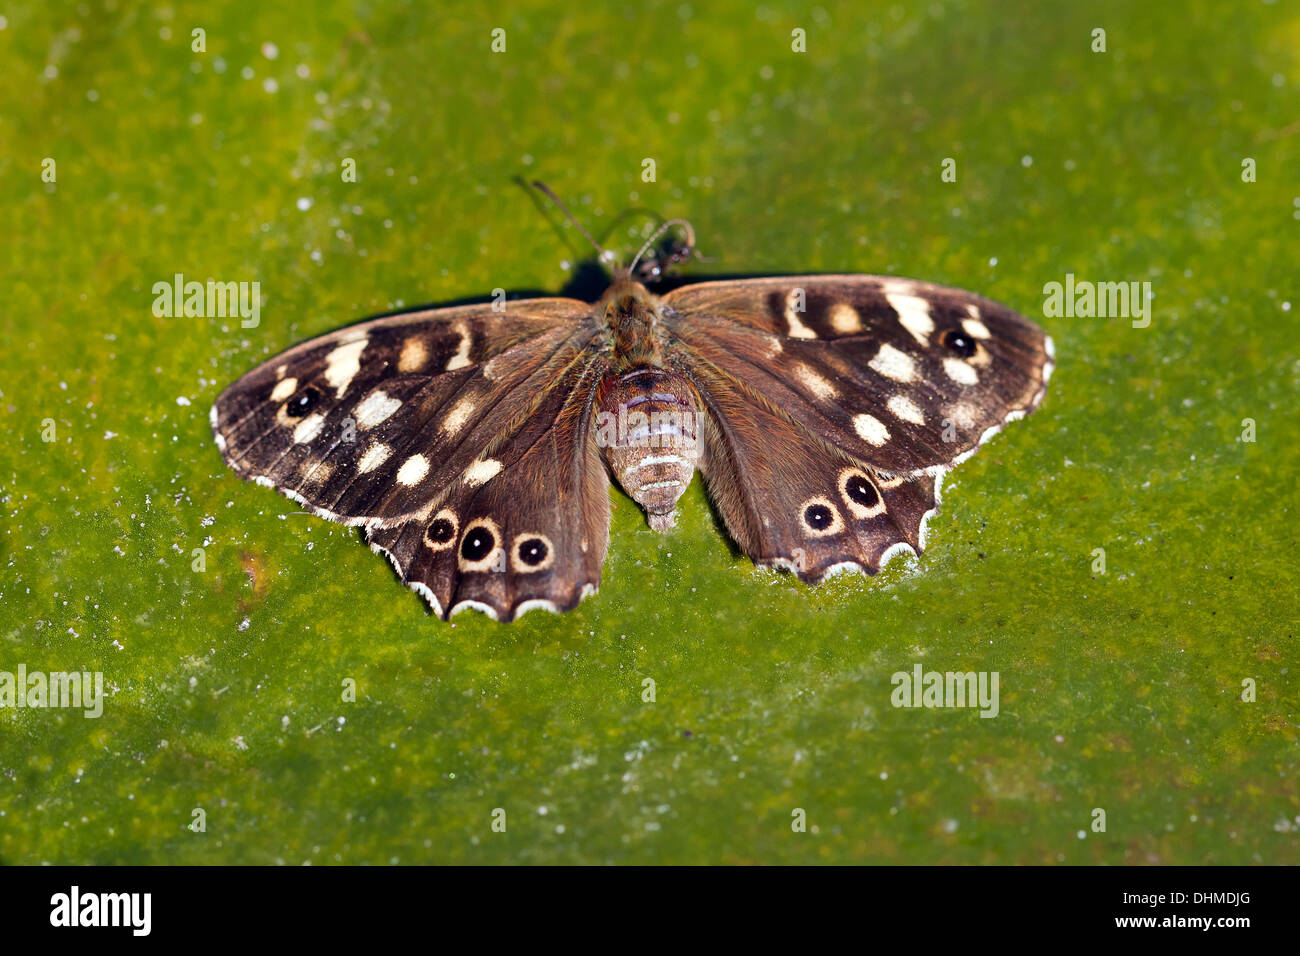 Macro image of a Speckled wood butterfly (Pararge aegeria). Stock Photo